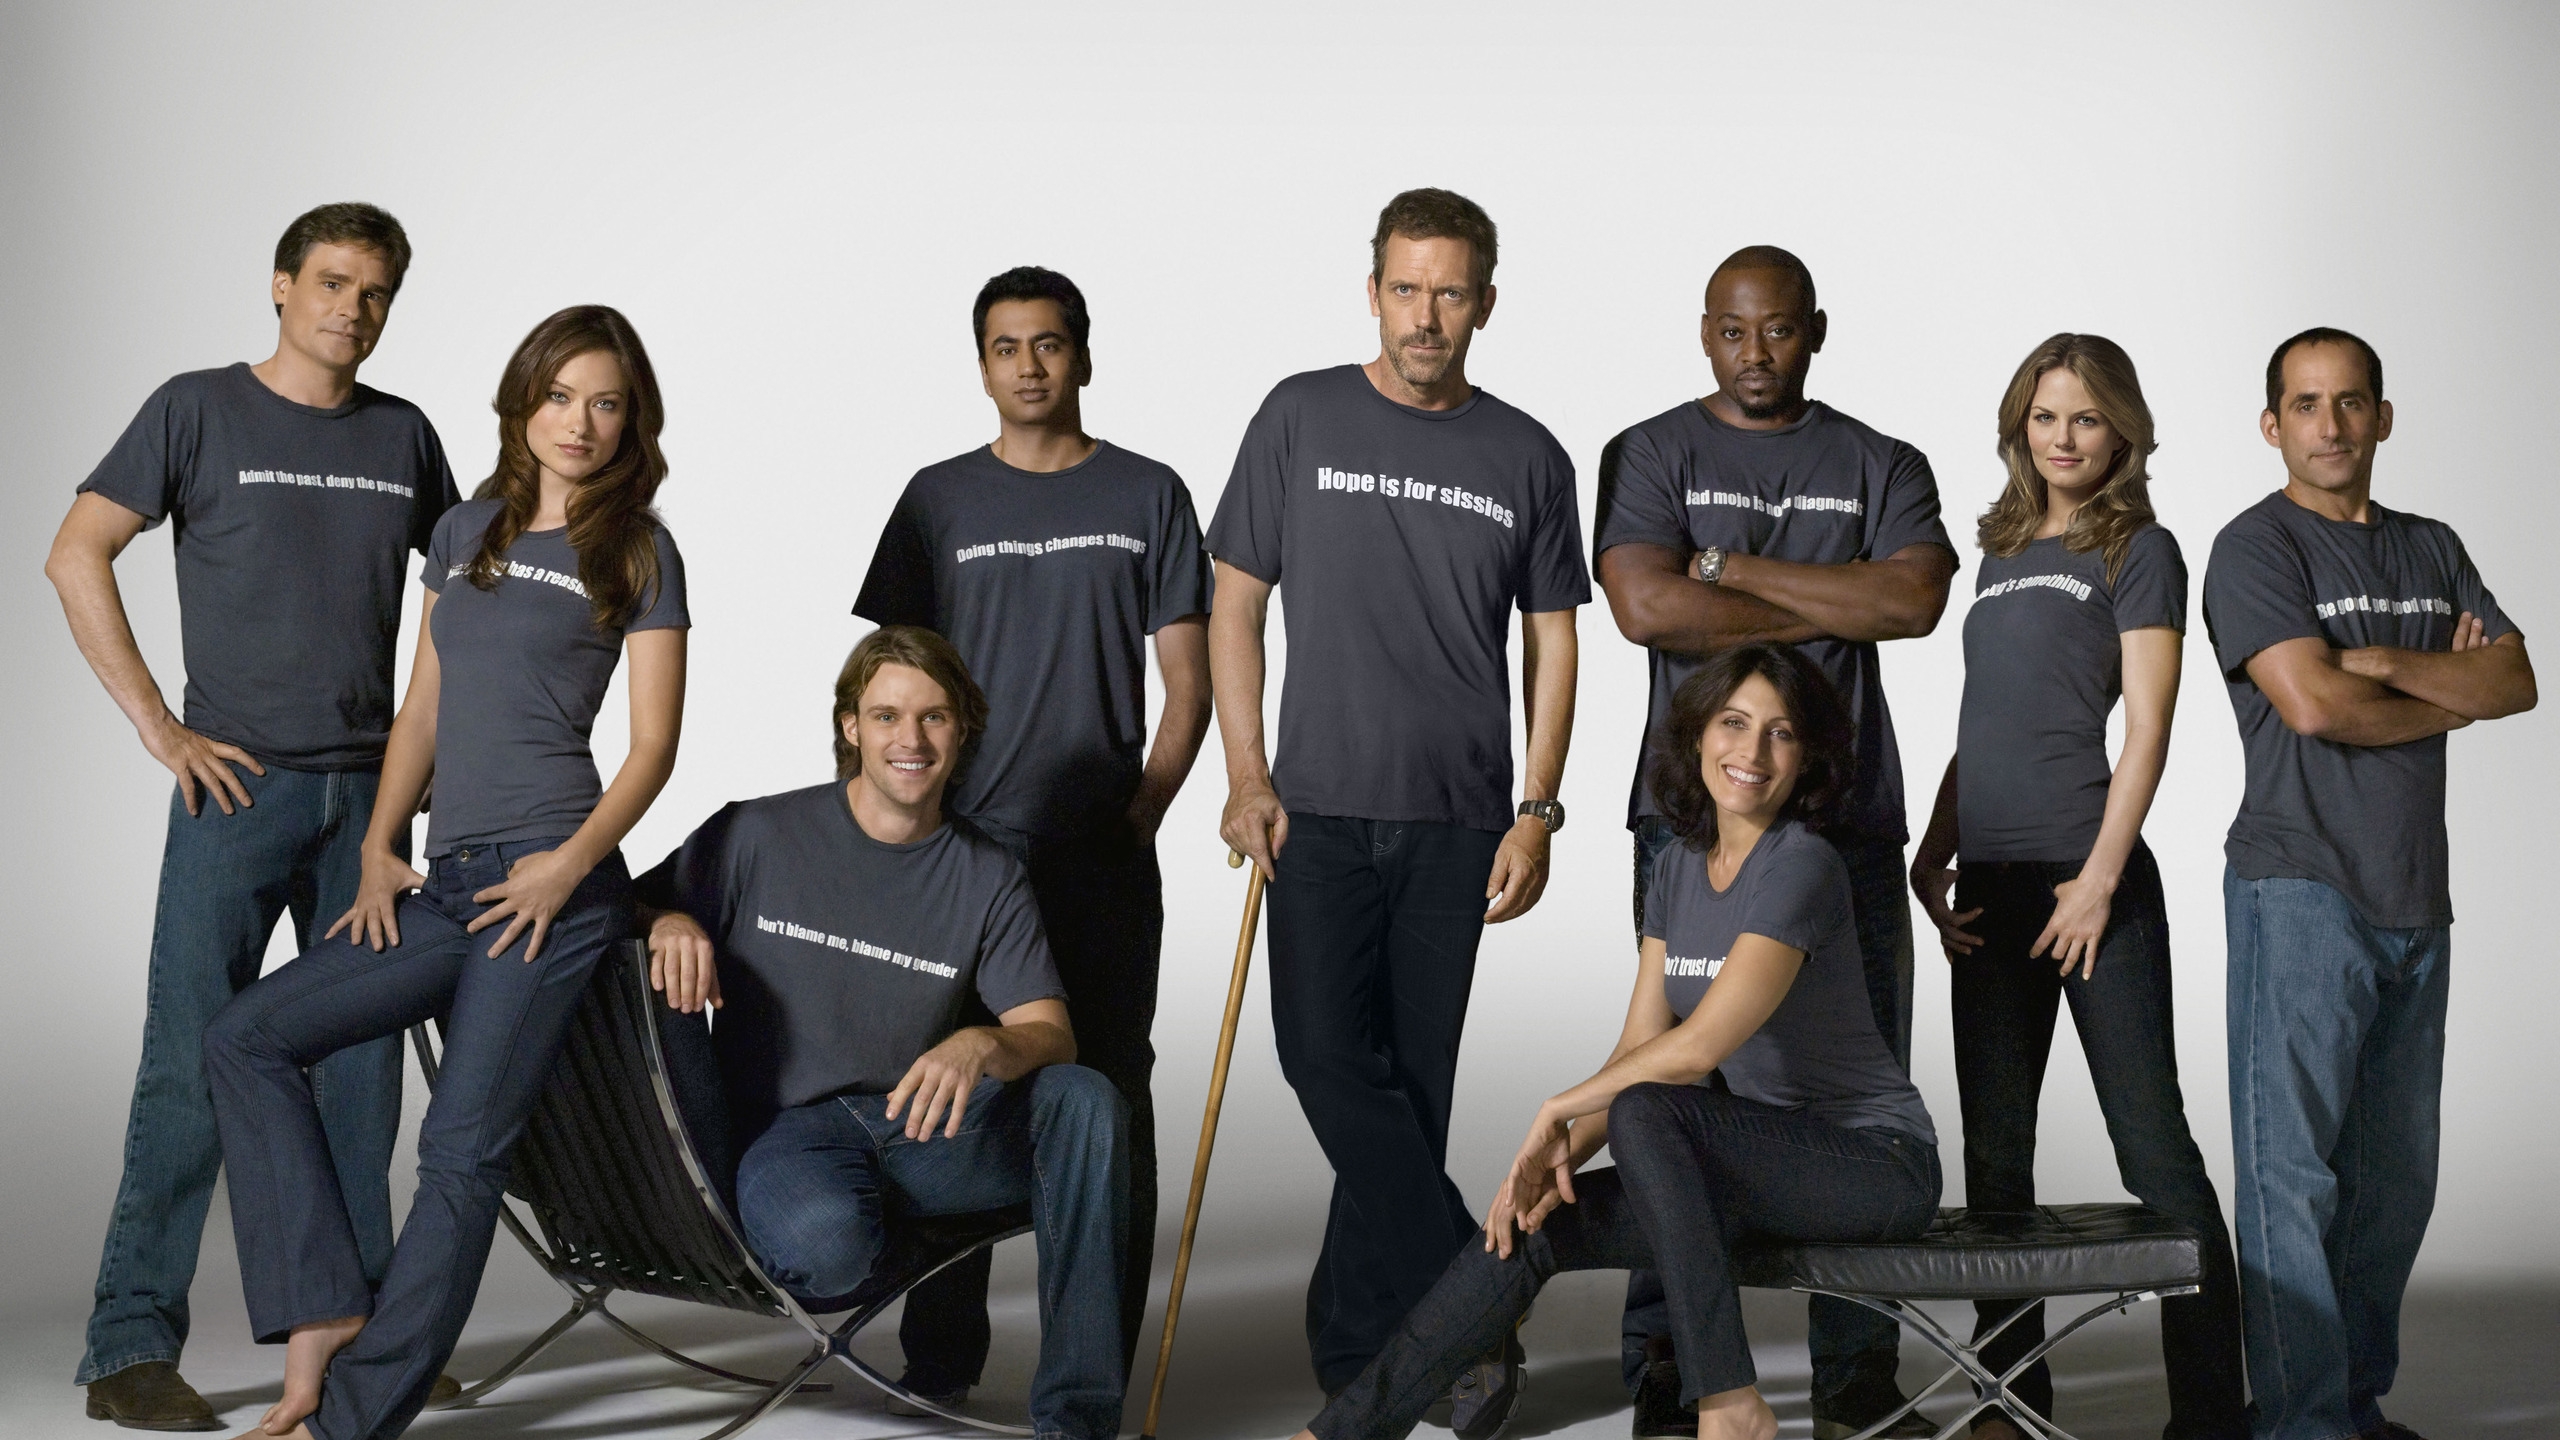 House MD Actors for 2560x1440 HDTV resolution